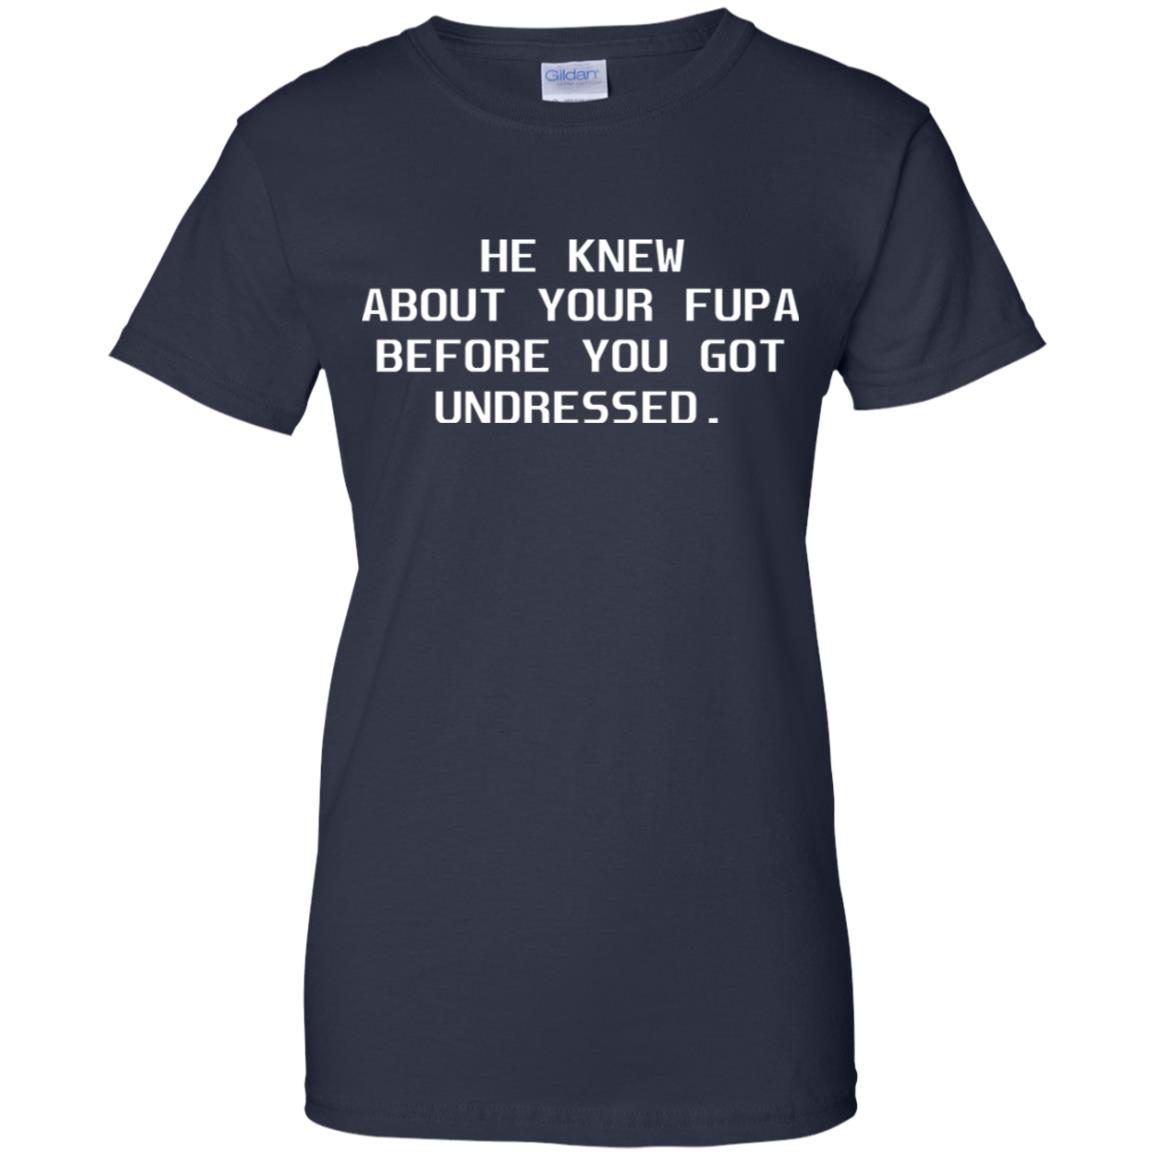 Fupa Shirt He Knew About Your Fupa Before You Undressed